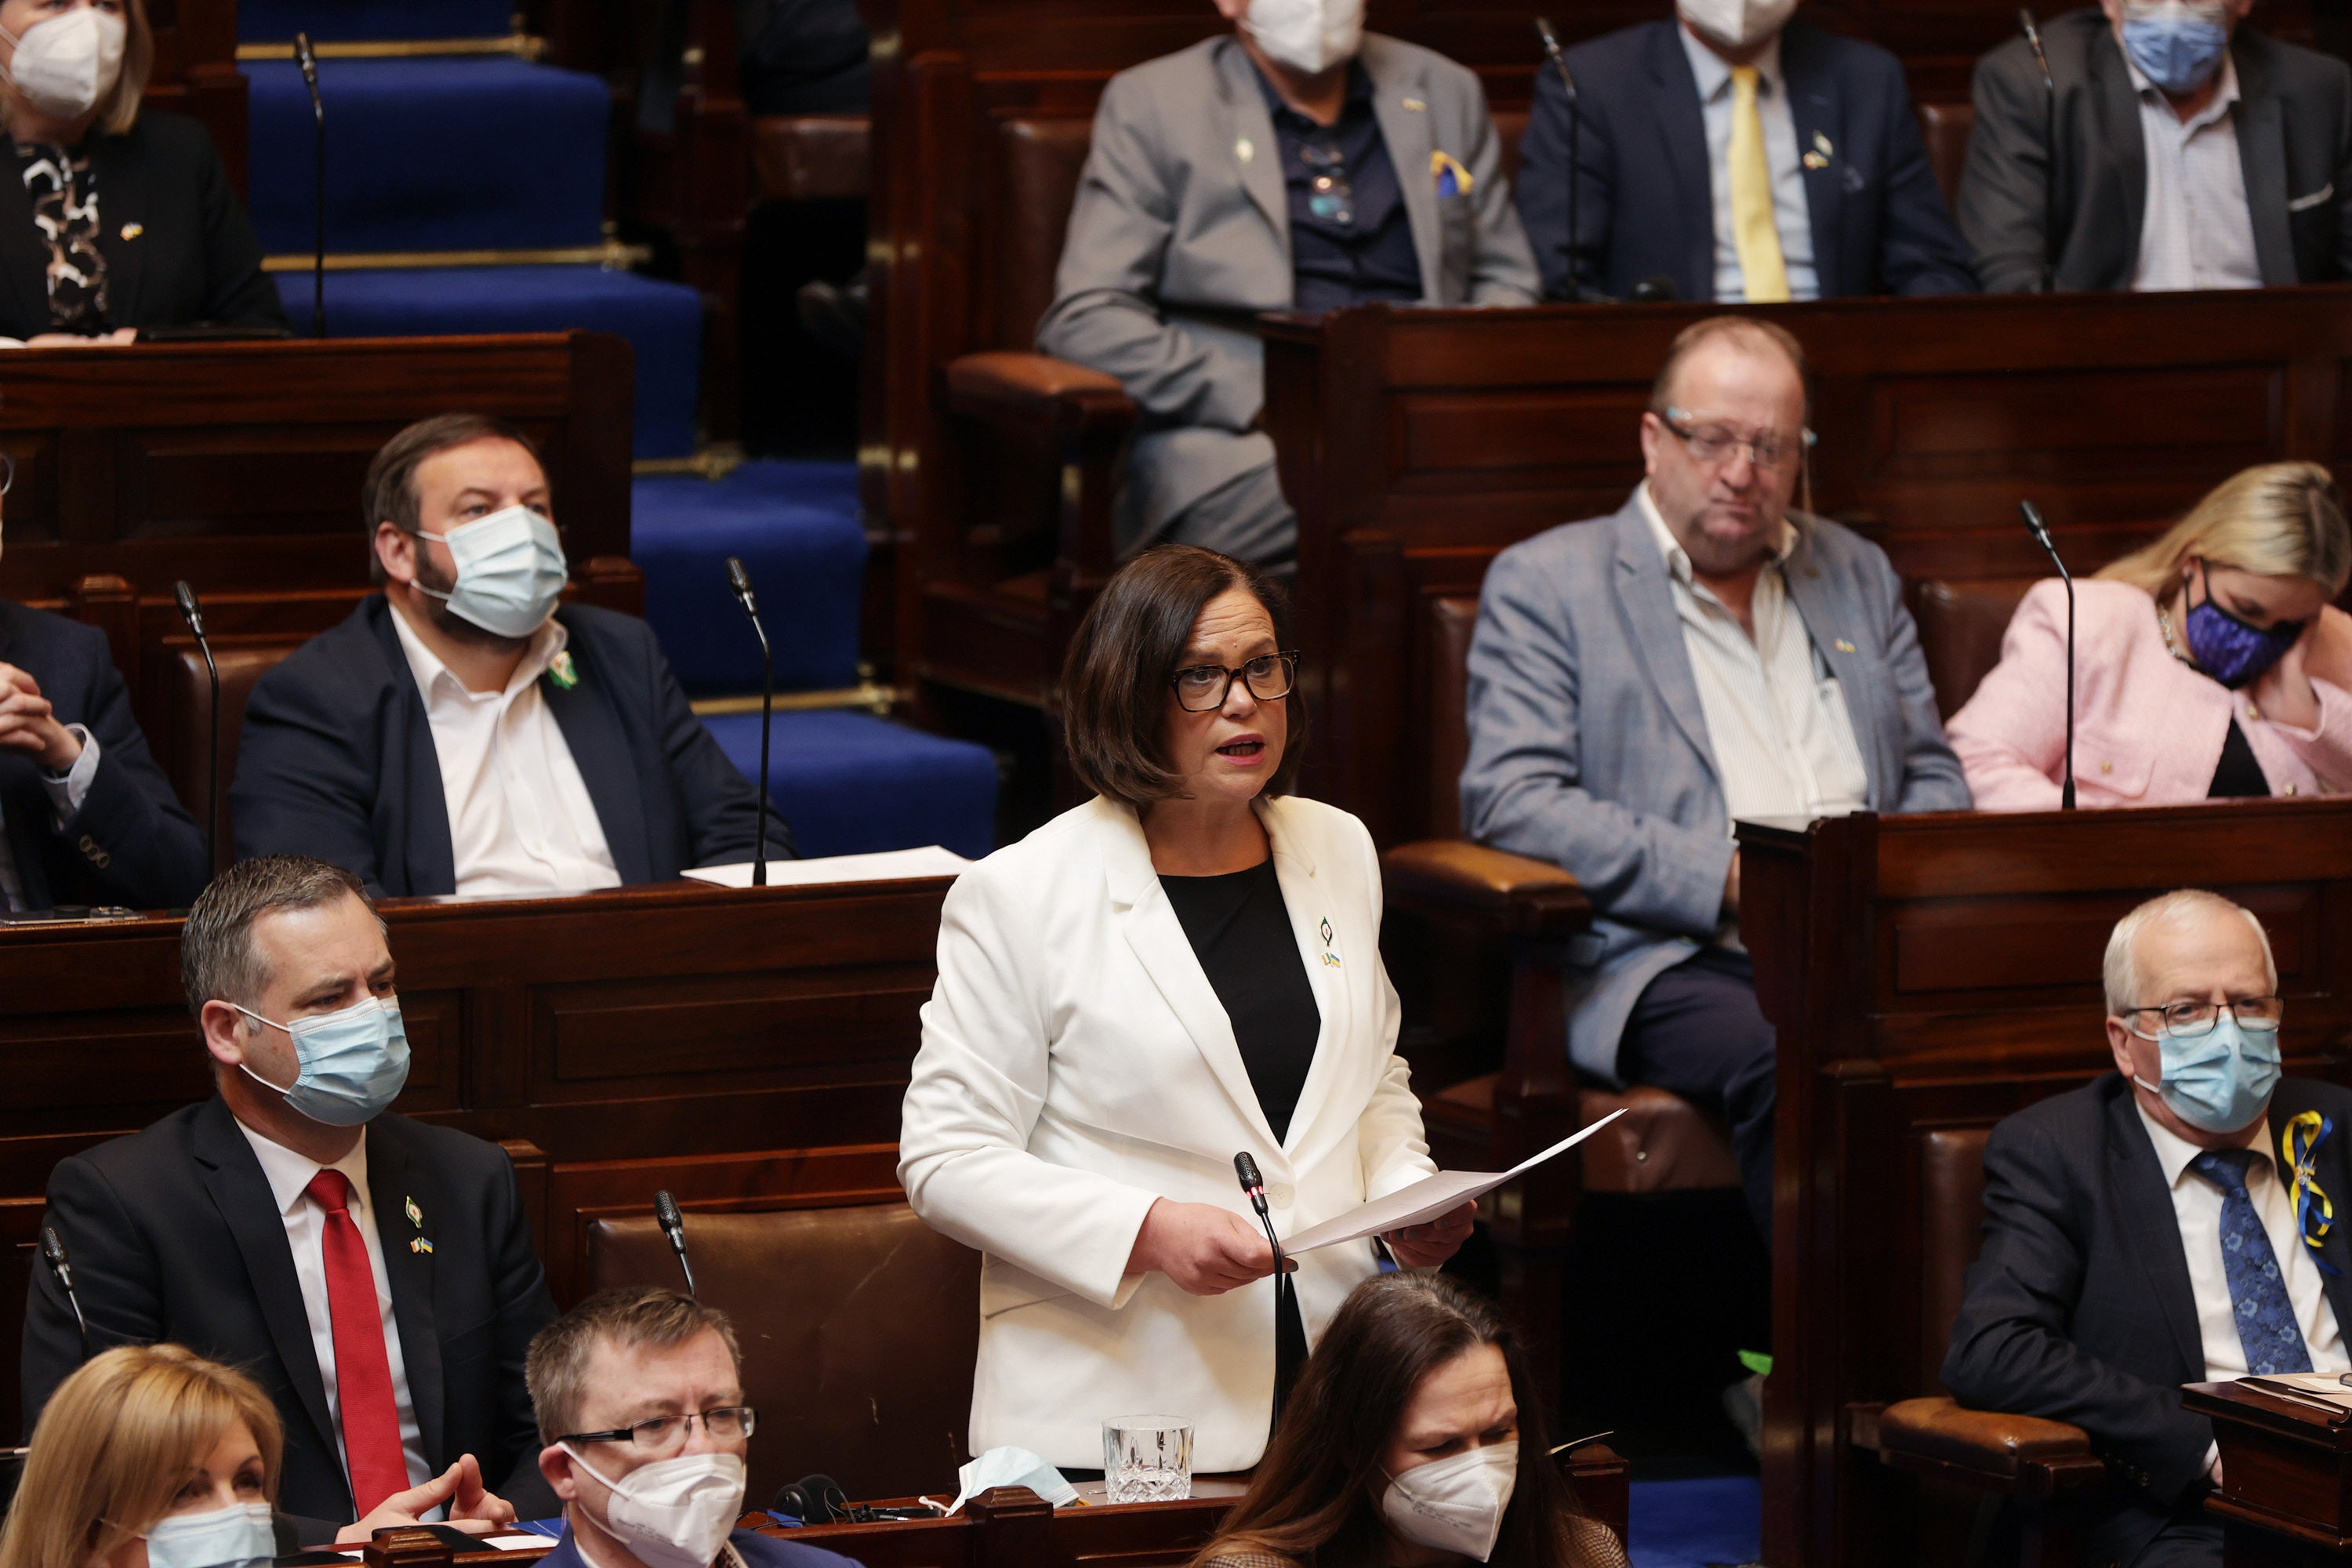 Mary Lou McDonald speaking after Volodymyr Zelensky, president of Ukraine, addressed the joint sitting (Maxwells/PA)